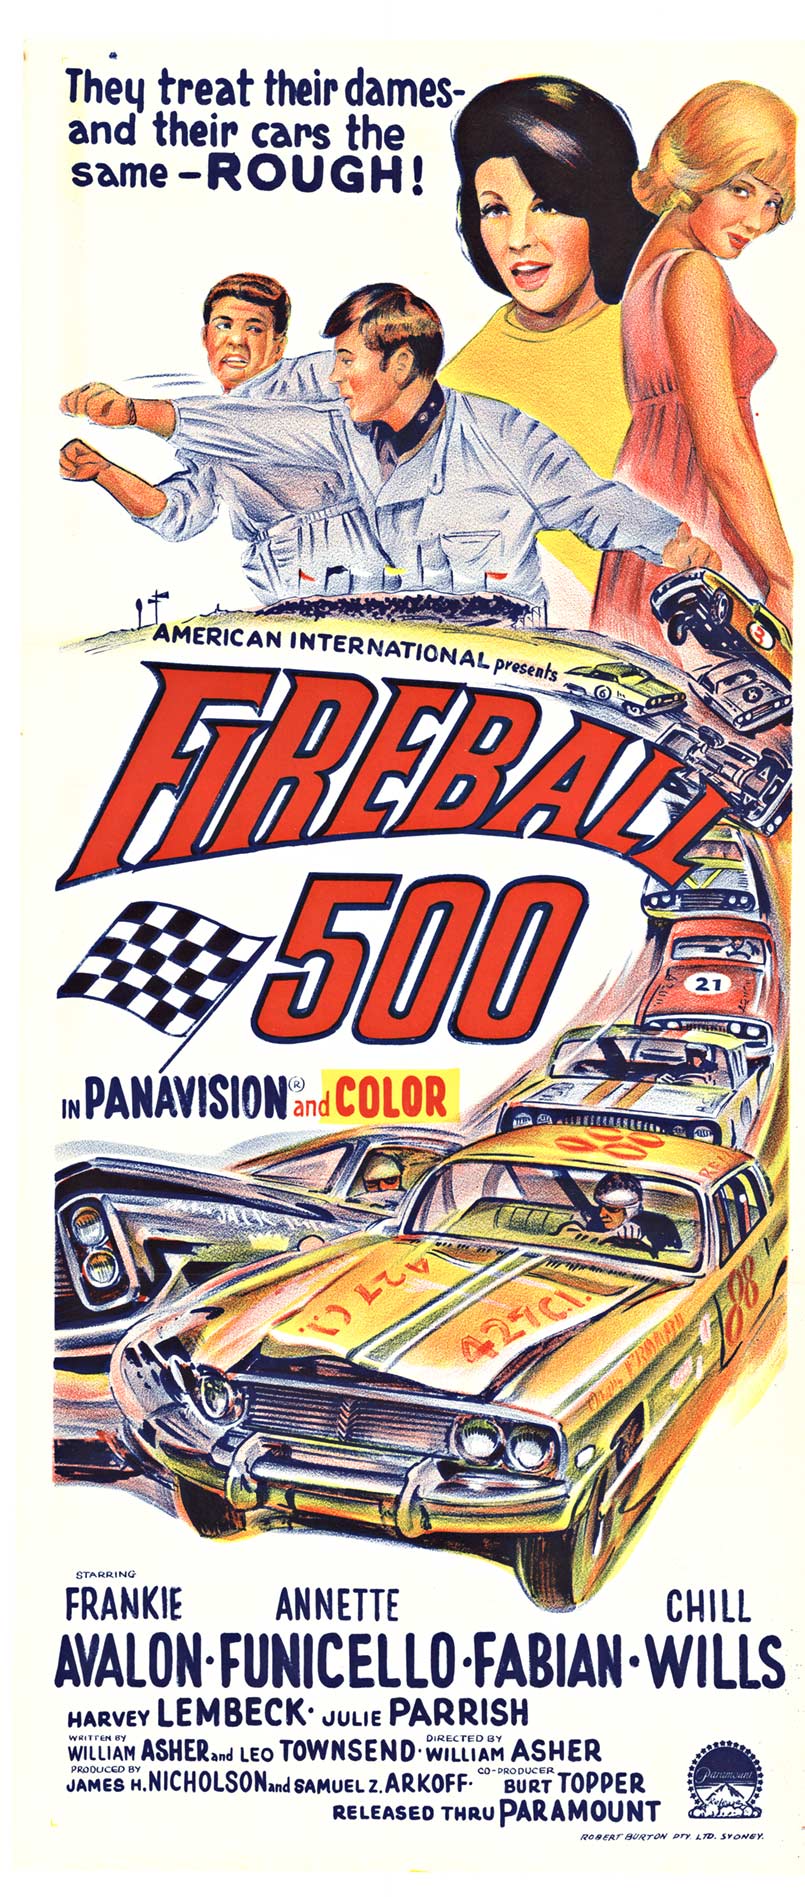 Original, archival linen backed, vintage movie poster: FIREBALL 500. <br>Fireball 500, 1966. Original antique muscle car hot rod movie poster for sale, starring; Frankie Avalon, Annette Funicello, Fabian director/writer William Asher and co-author Leo T